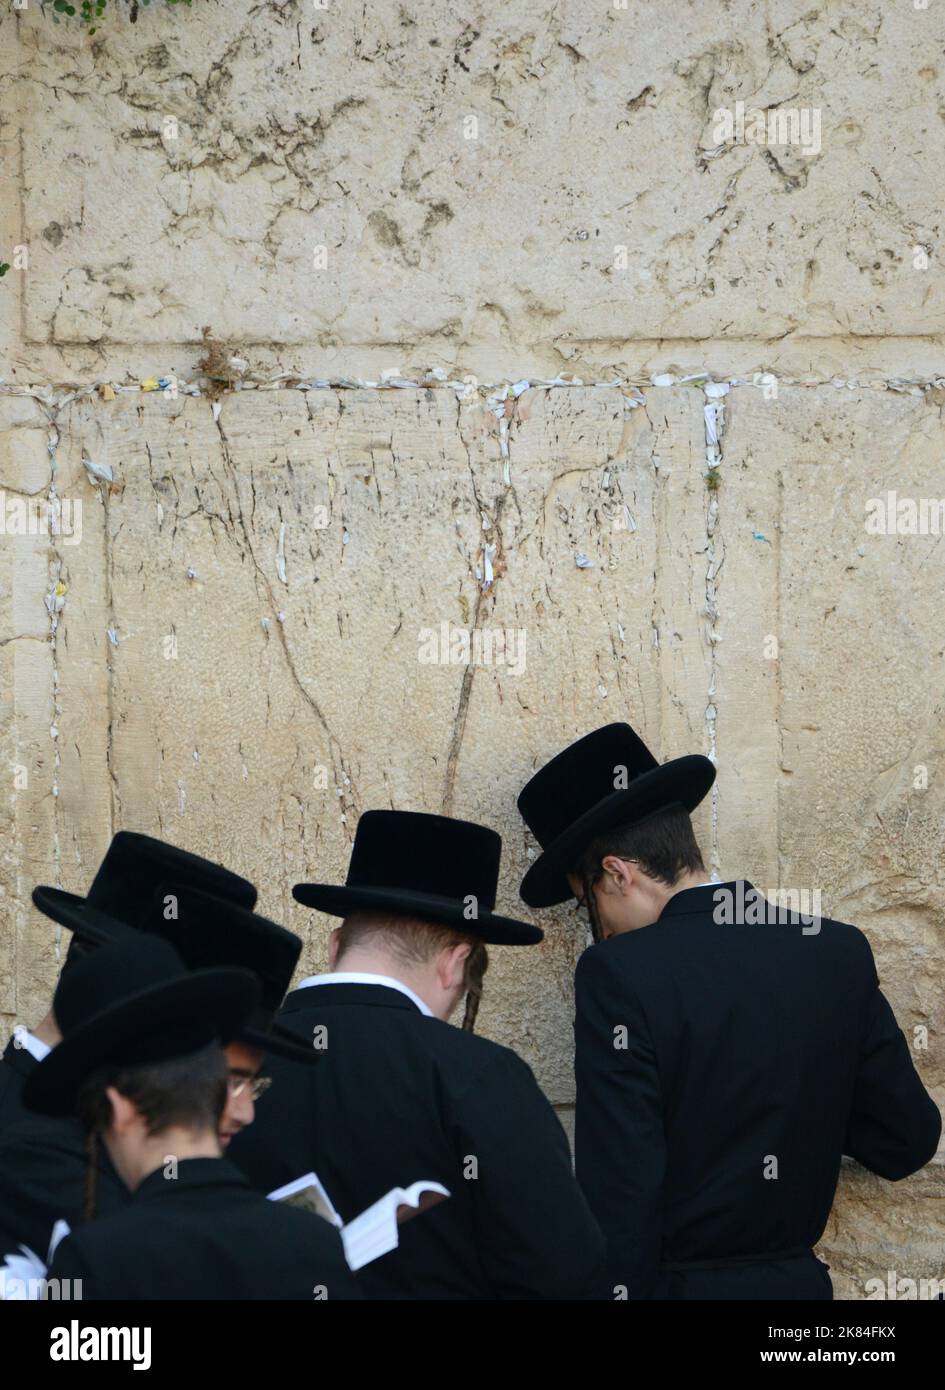 Jewish men praying by the Wailing Wall / Western Wall in the Jewish quarter in the old city of Jerusalem, Israel. Stock Photo